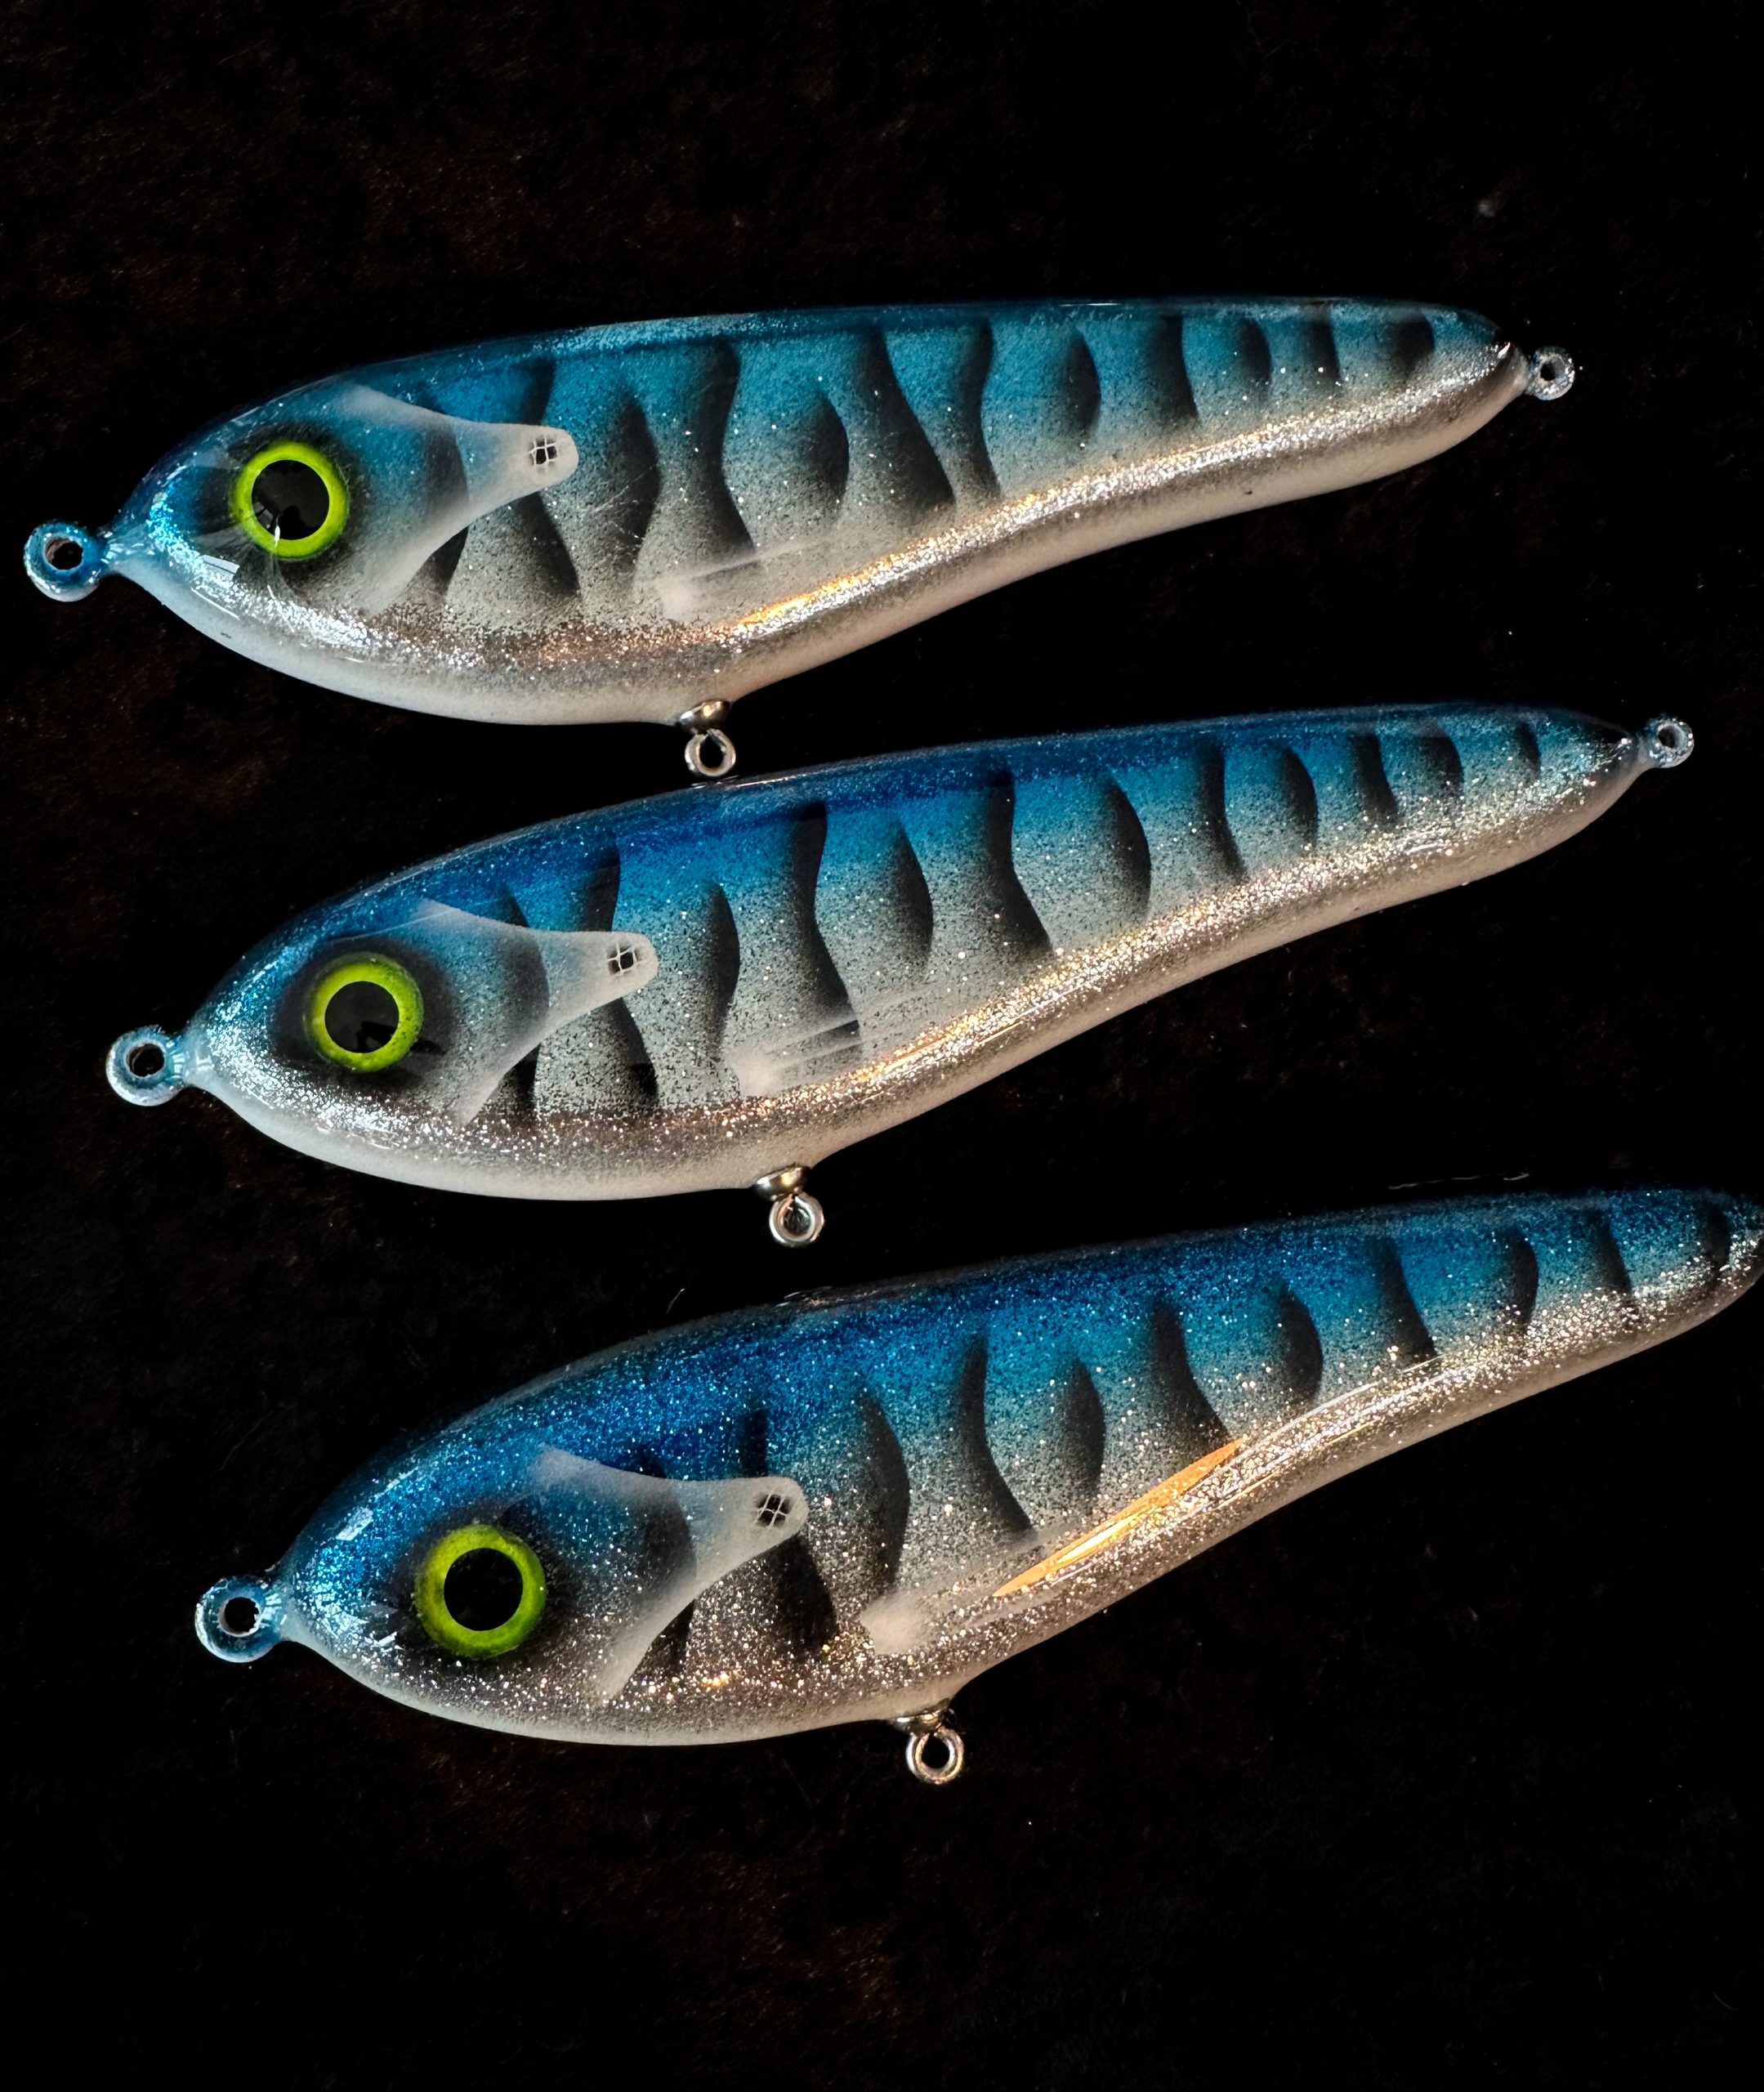 Zappa Crank ”red head” - Lovely Lures